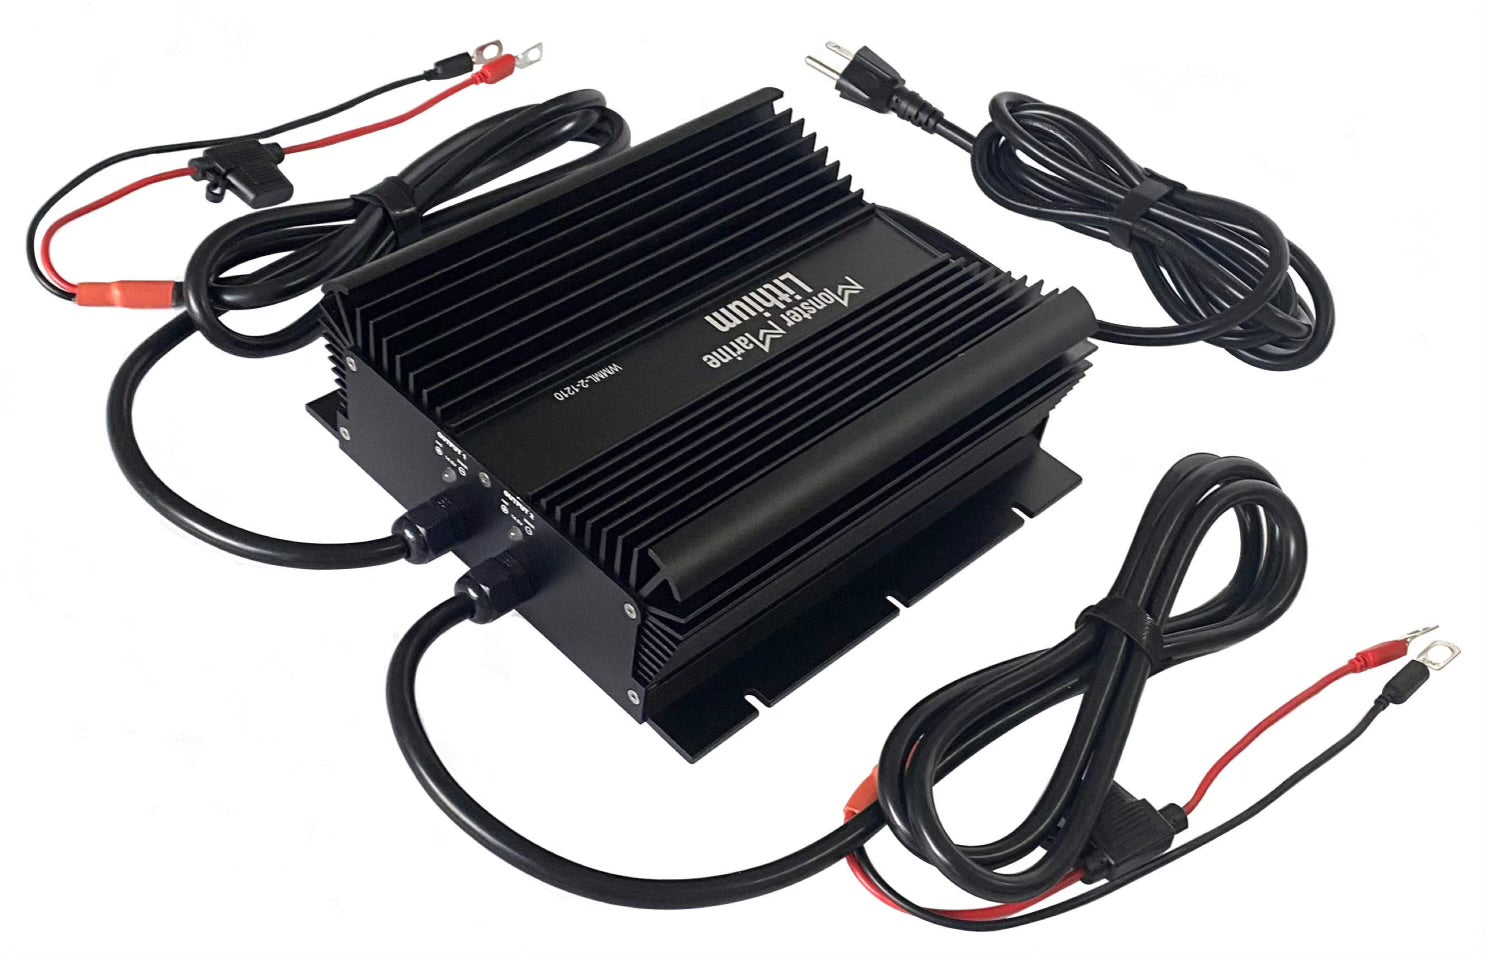 2 Bank Lithium & AGM Marine Waterproof Battery Charger